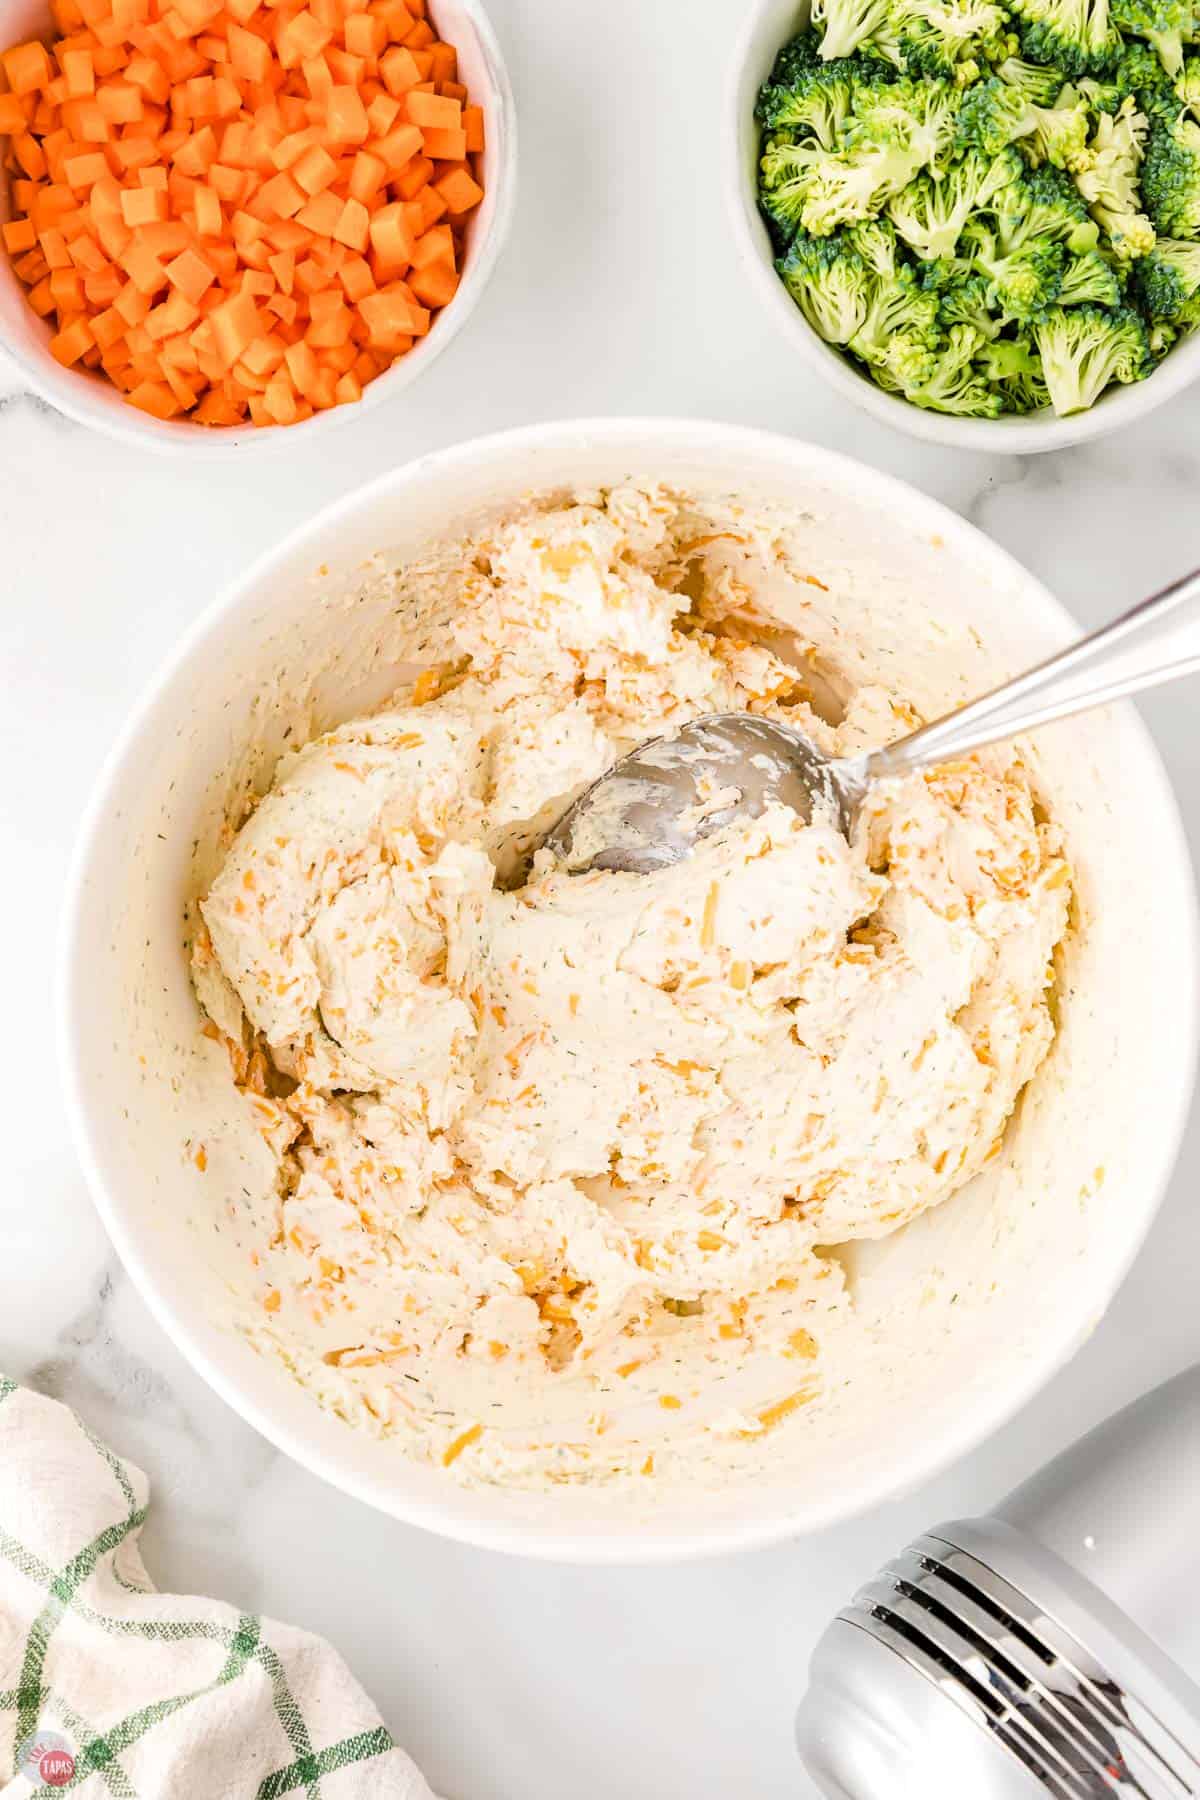 cream cheese mixture with cheese and broccoli